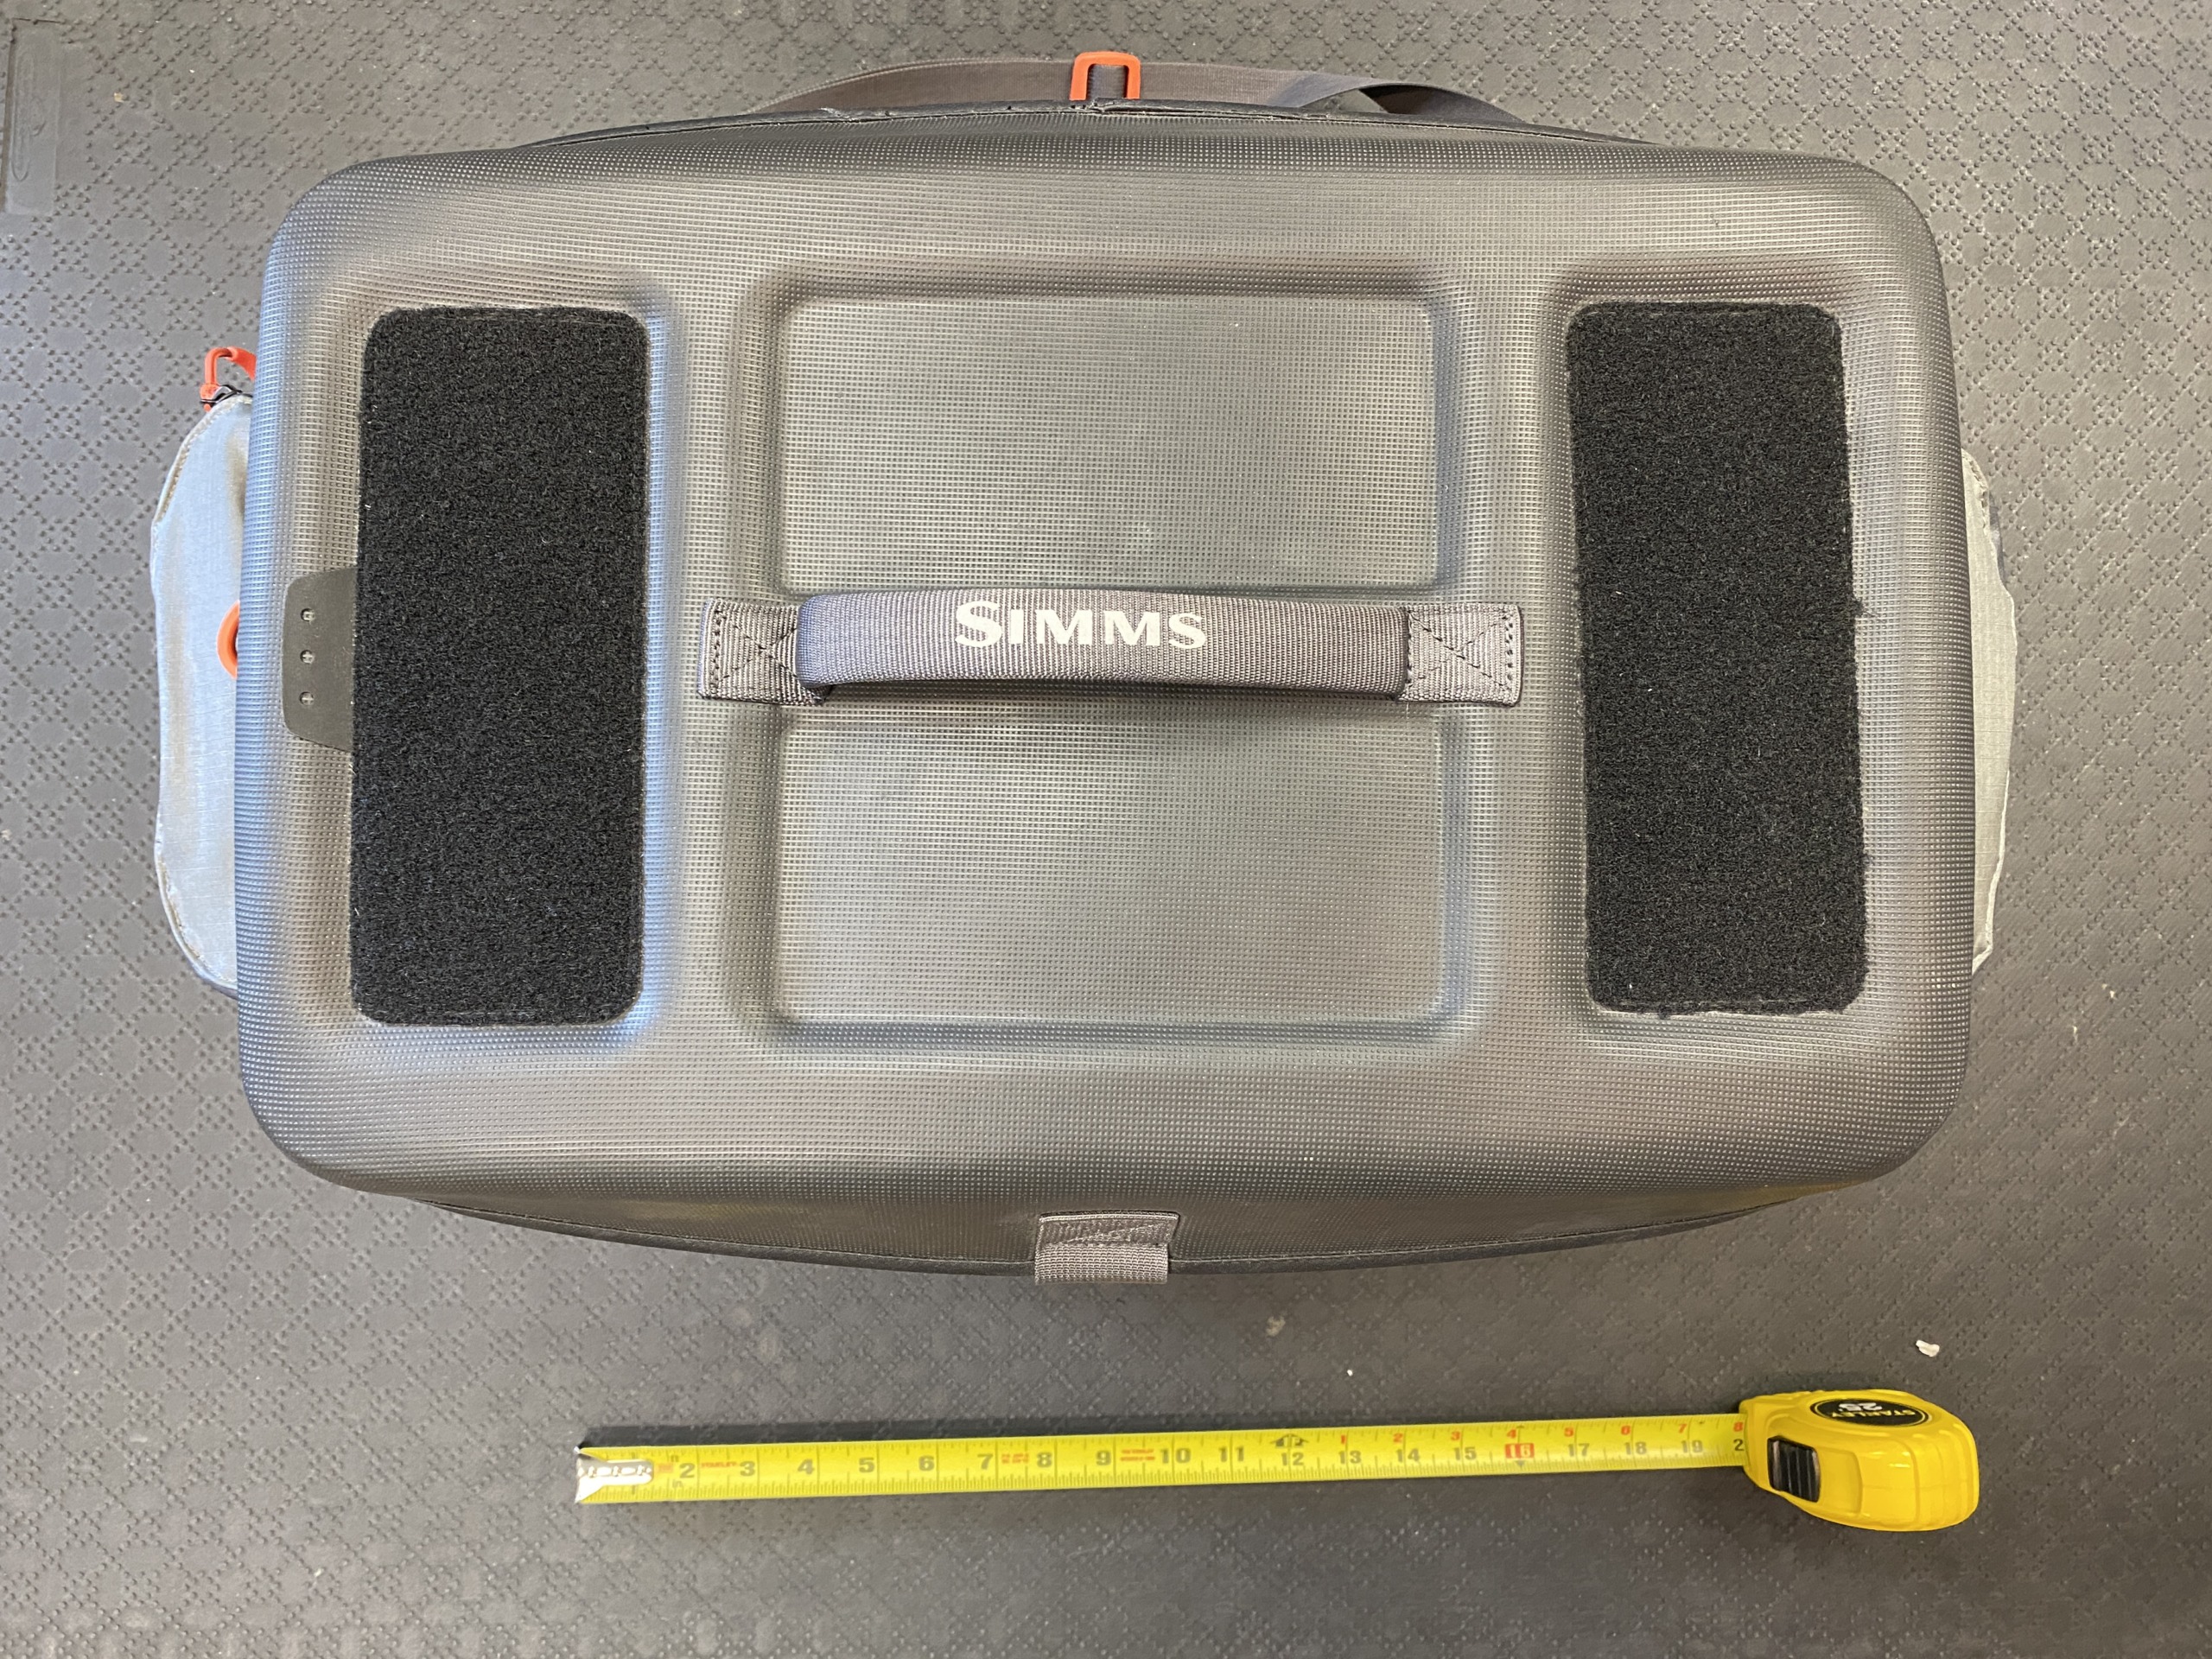 Simms Boat Bag Large 25L - NEVER USED! - $250